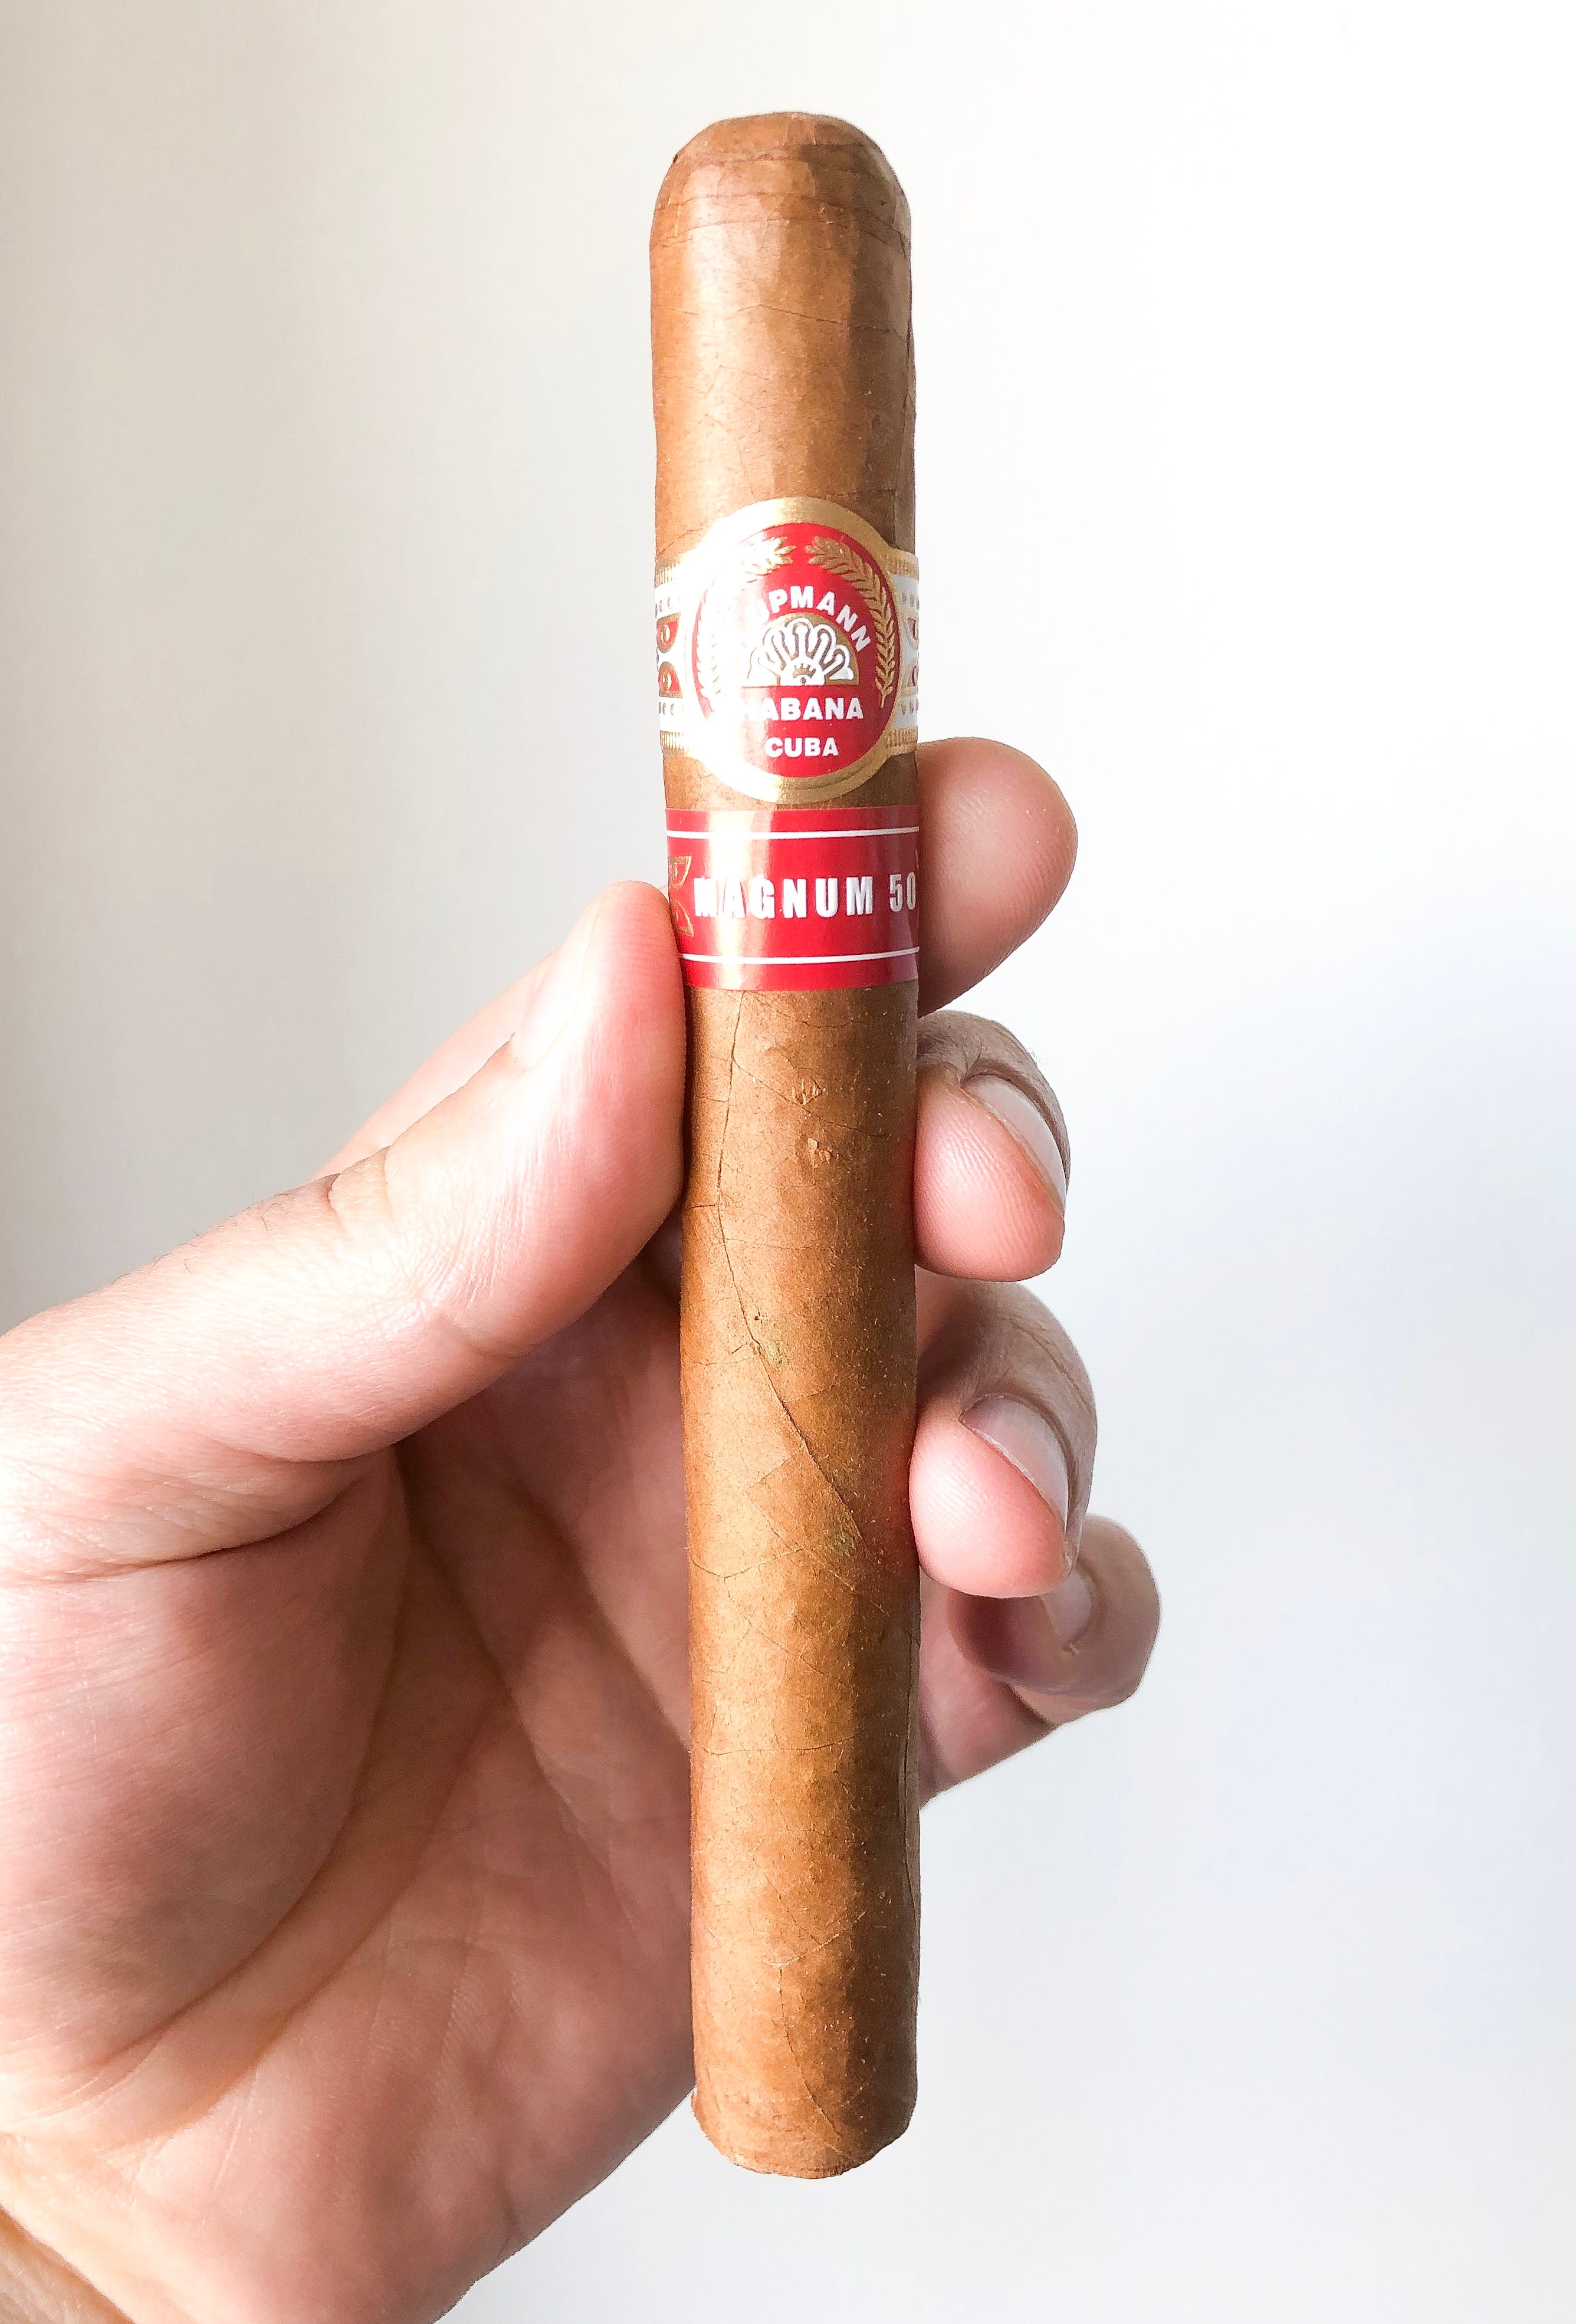 Top 15 Cuban Cigars to have on your humidor. | by All Things Cigars | Medium